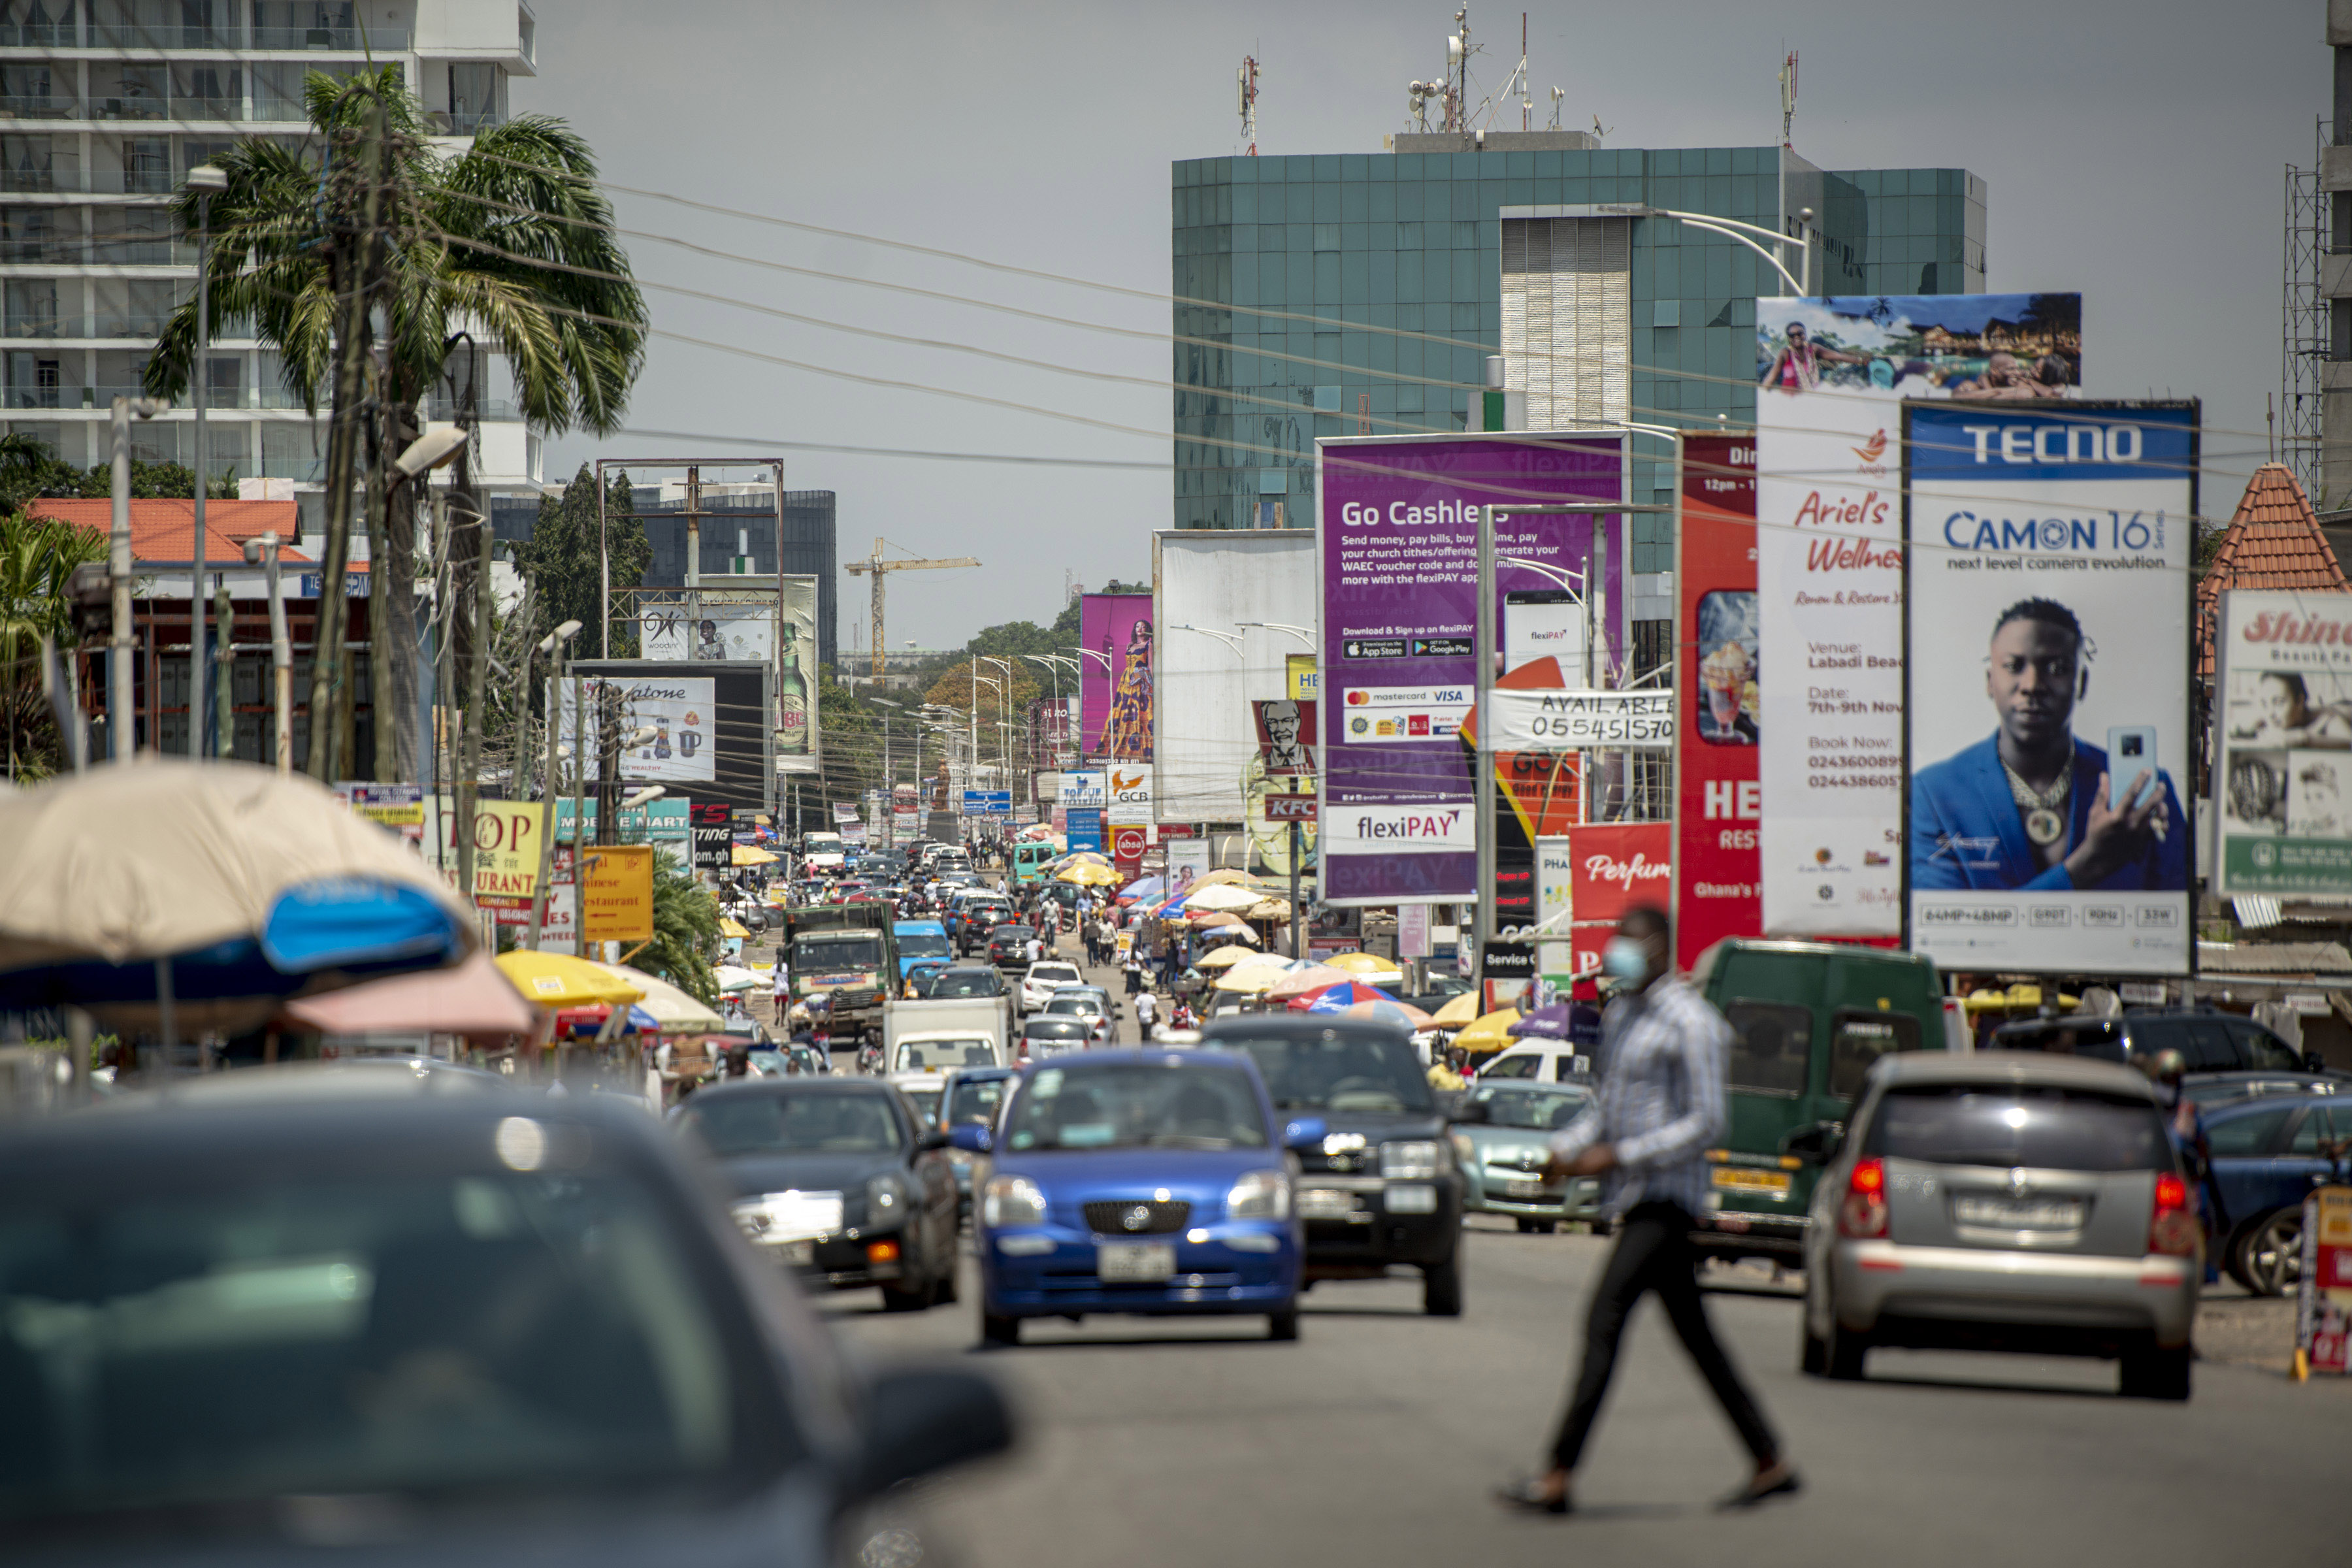 Vehicles travel along a road in Accra, Ghana.